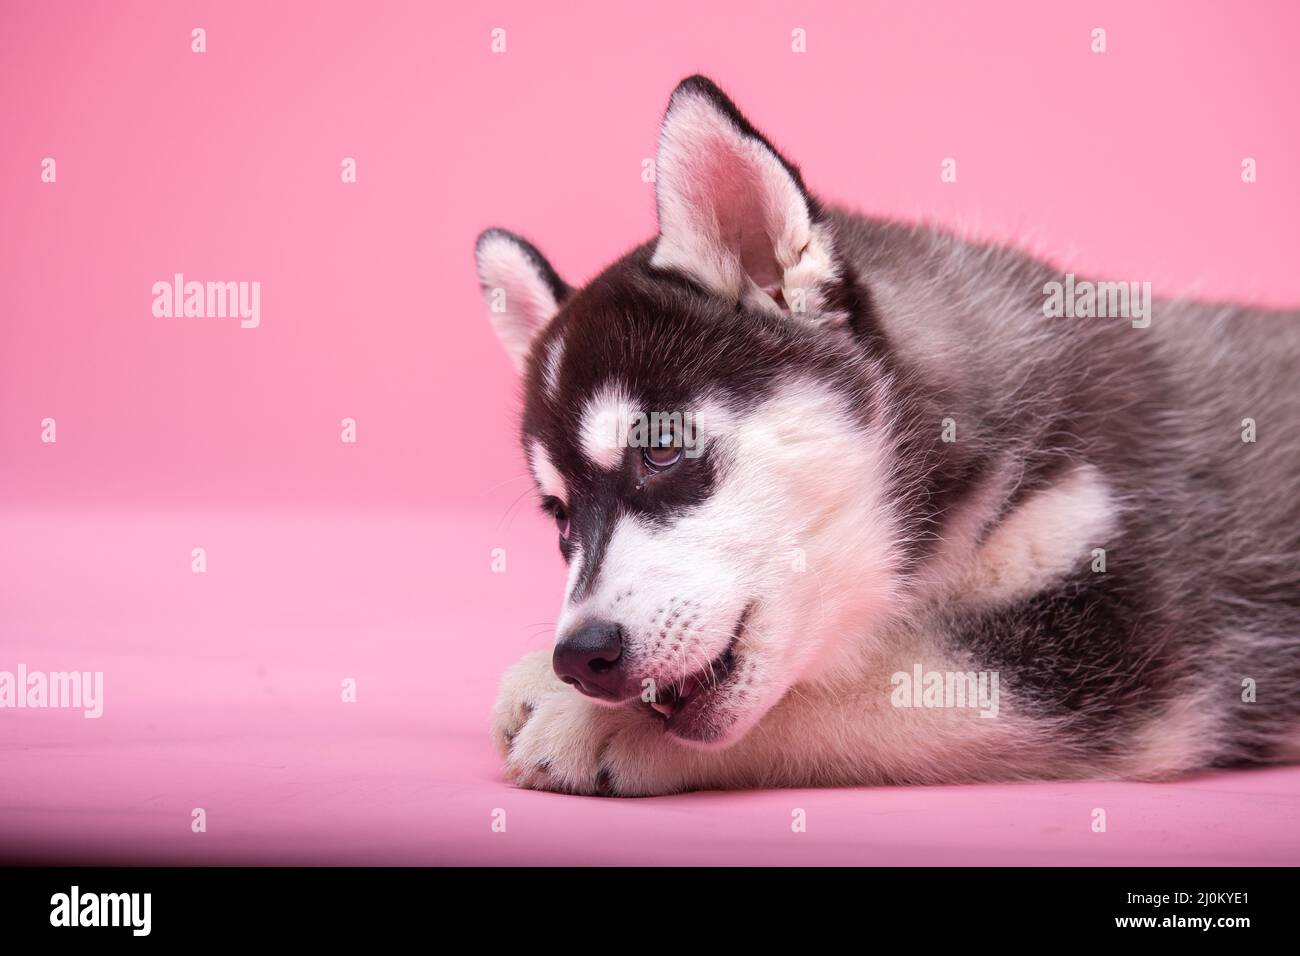 Studio shot of a husky female dog less than one year old black and white on pink background. Concept of canine emotions. Pets th Stock Photo